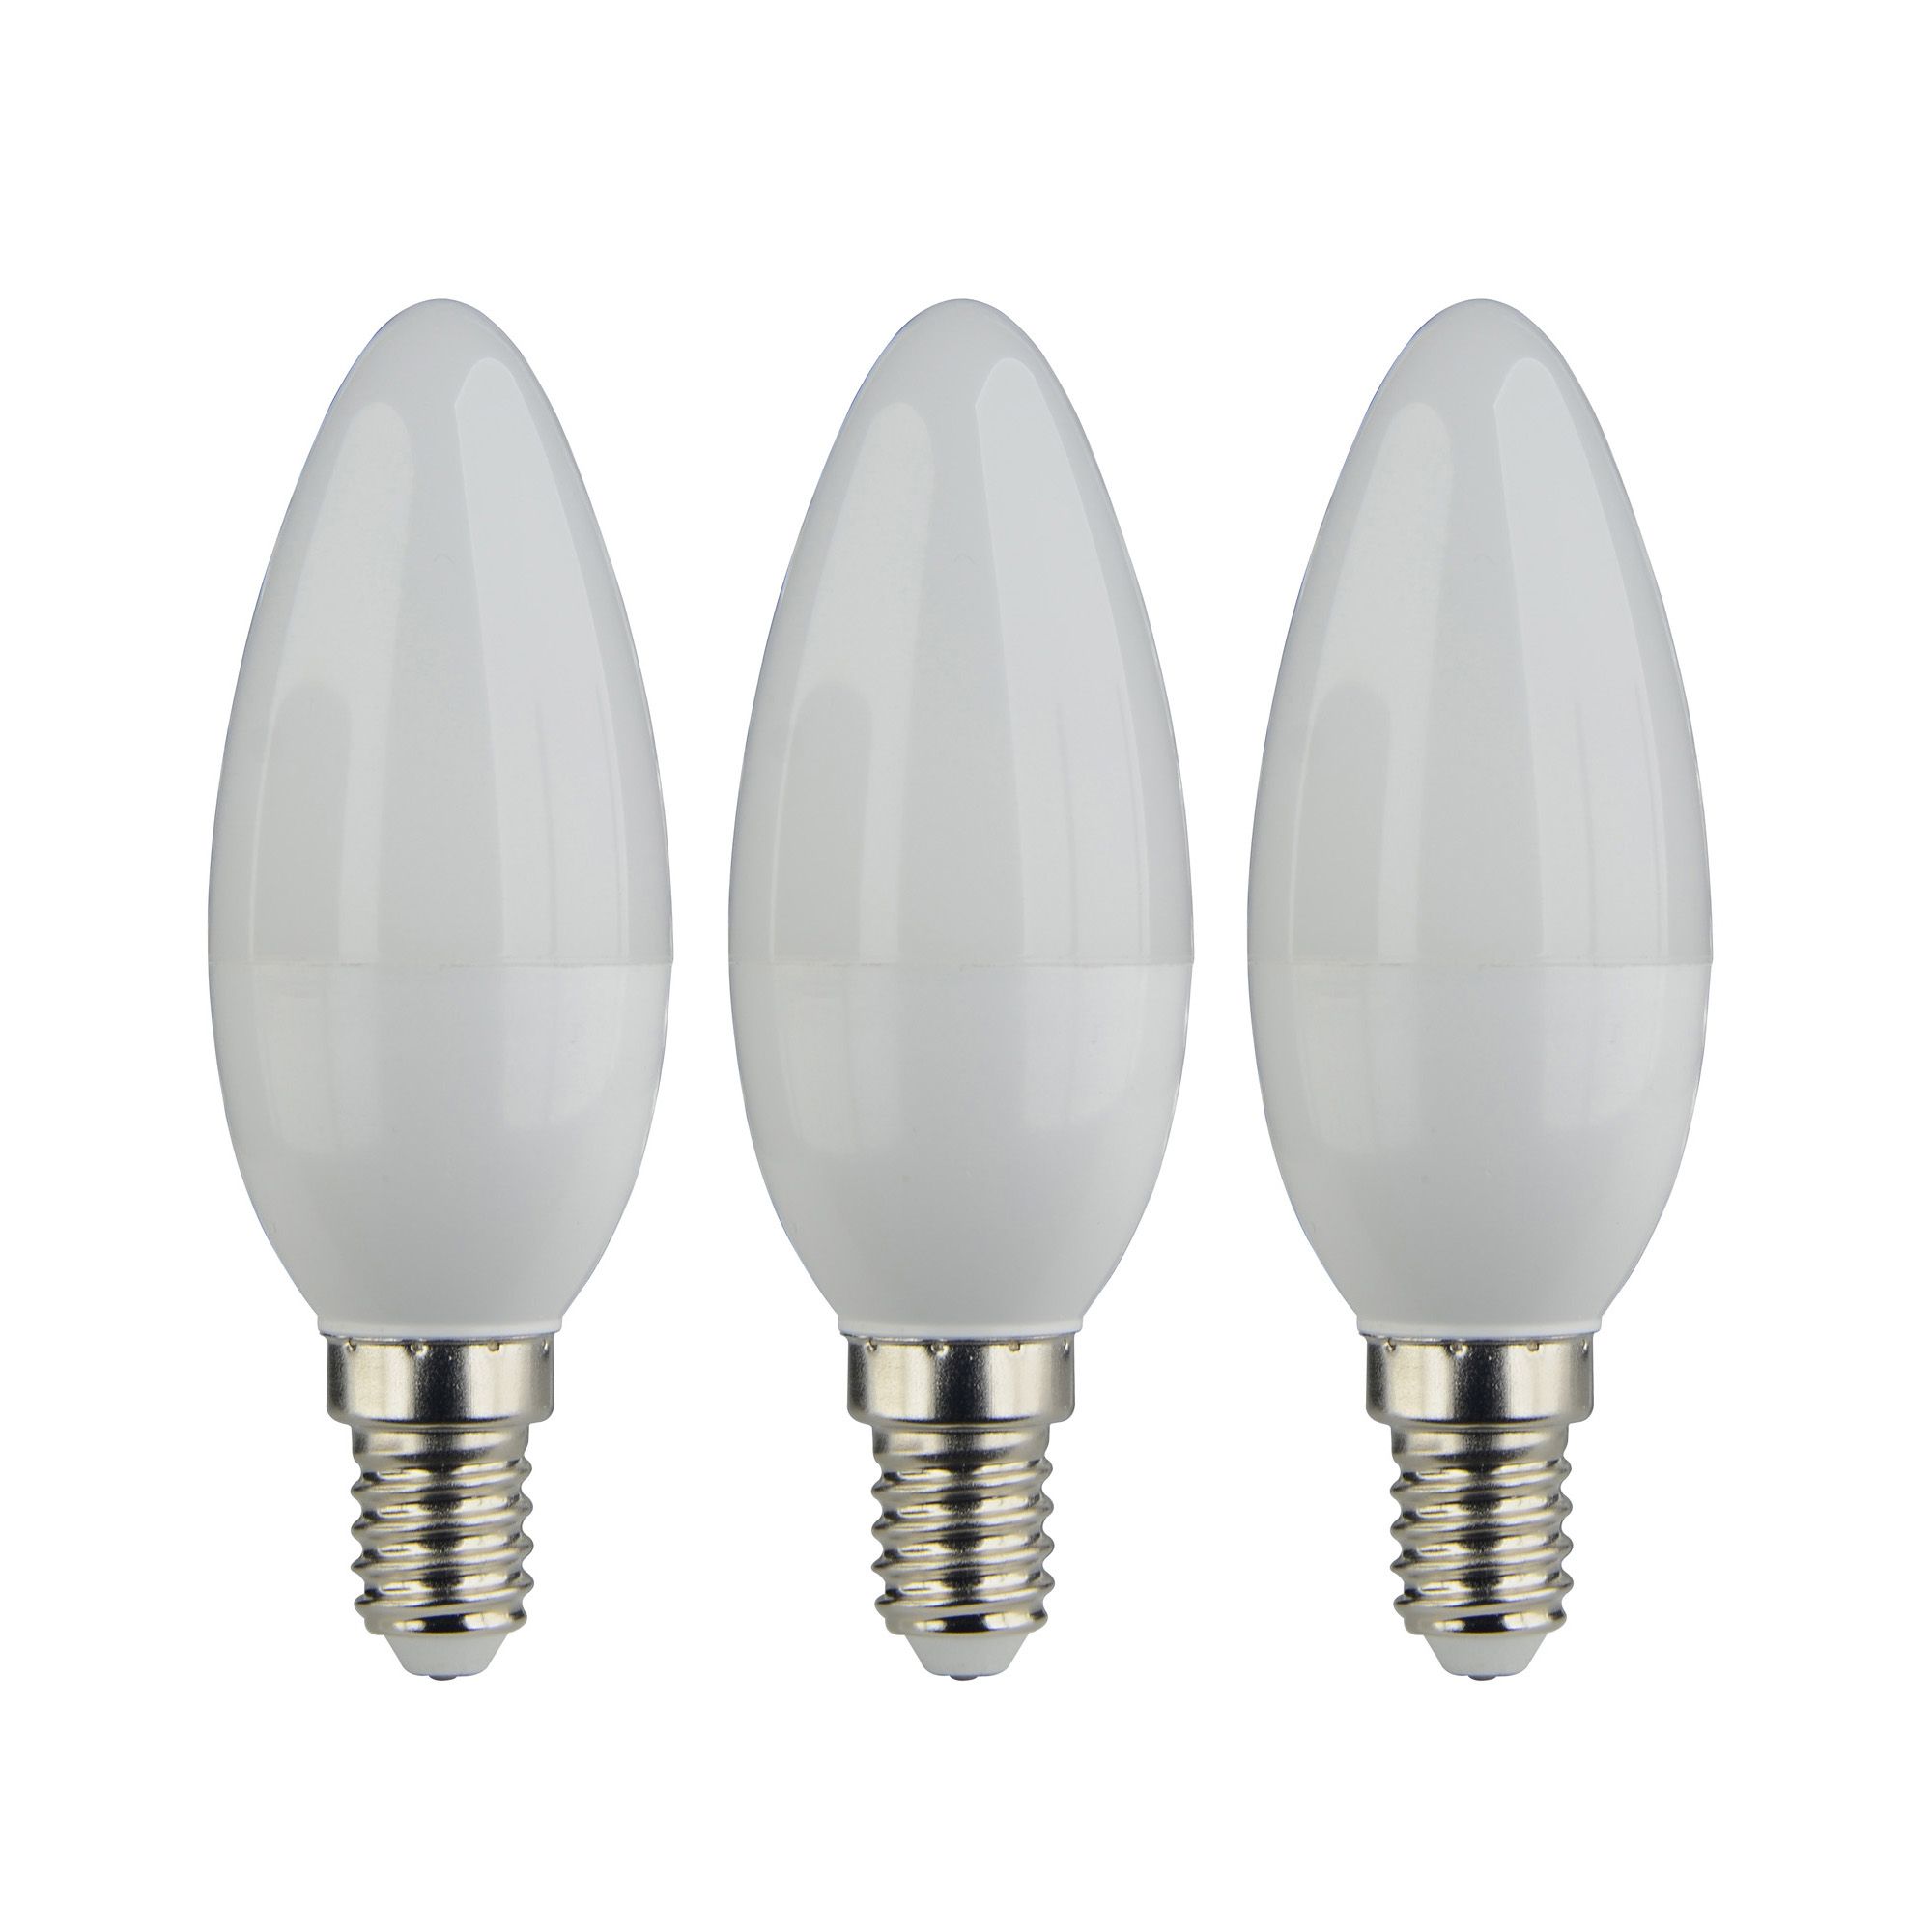 Diall E14 4.2W 470lm Frosted Candle Warm white LED Light bulb, Pack of 3